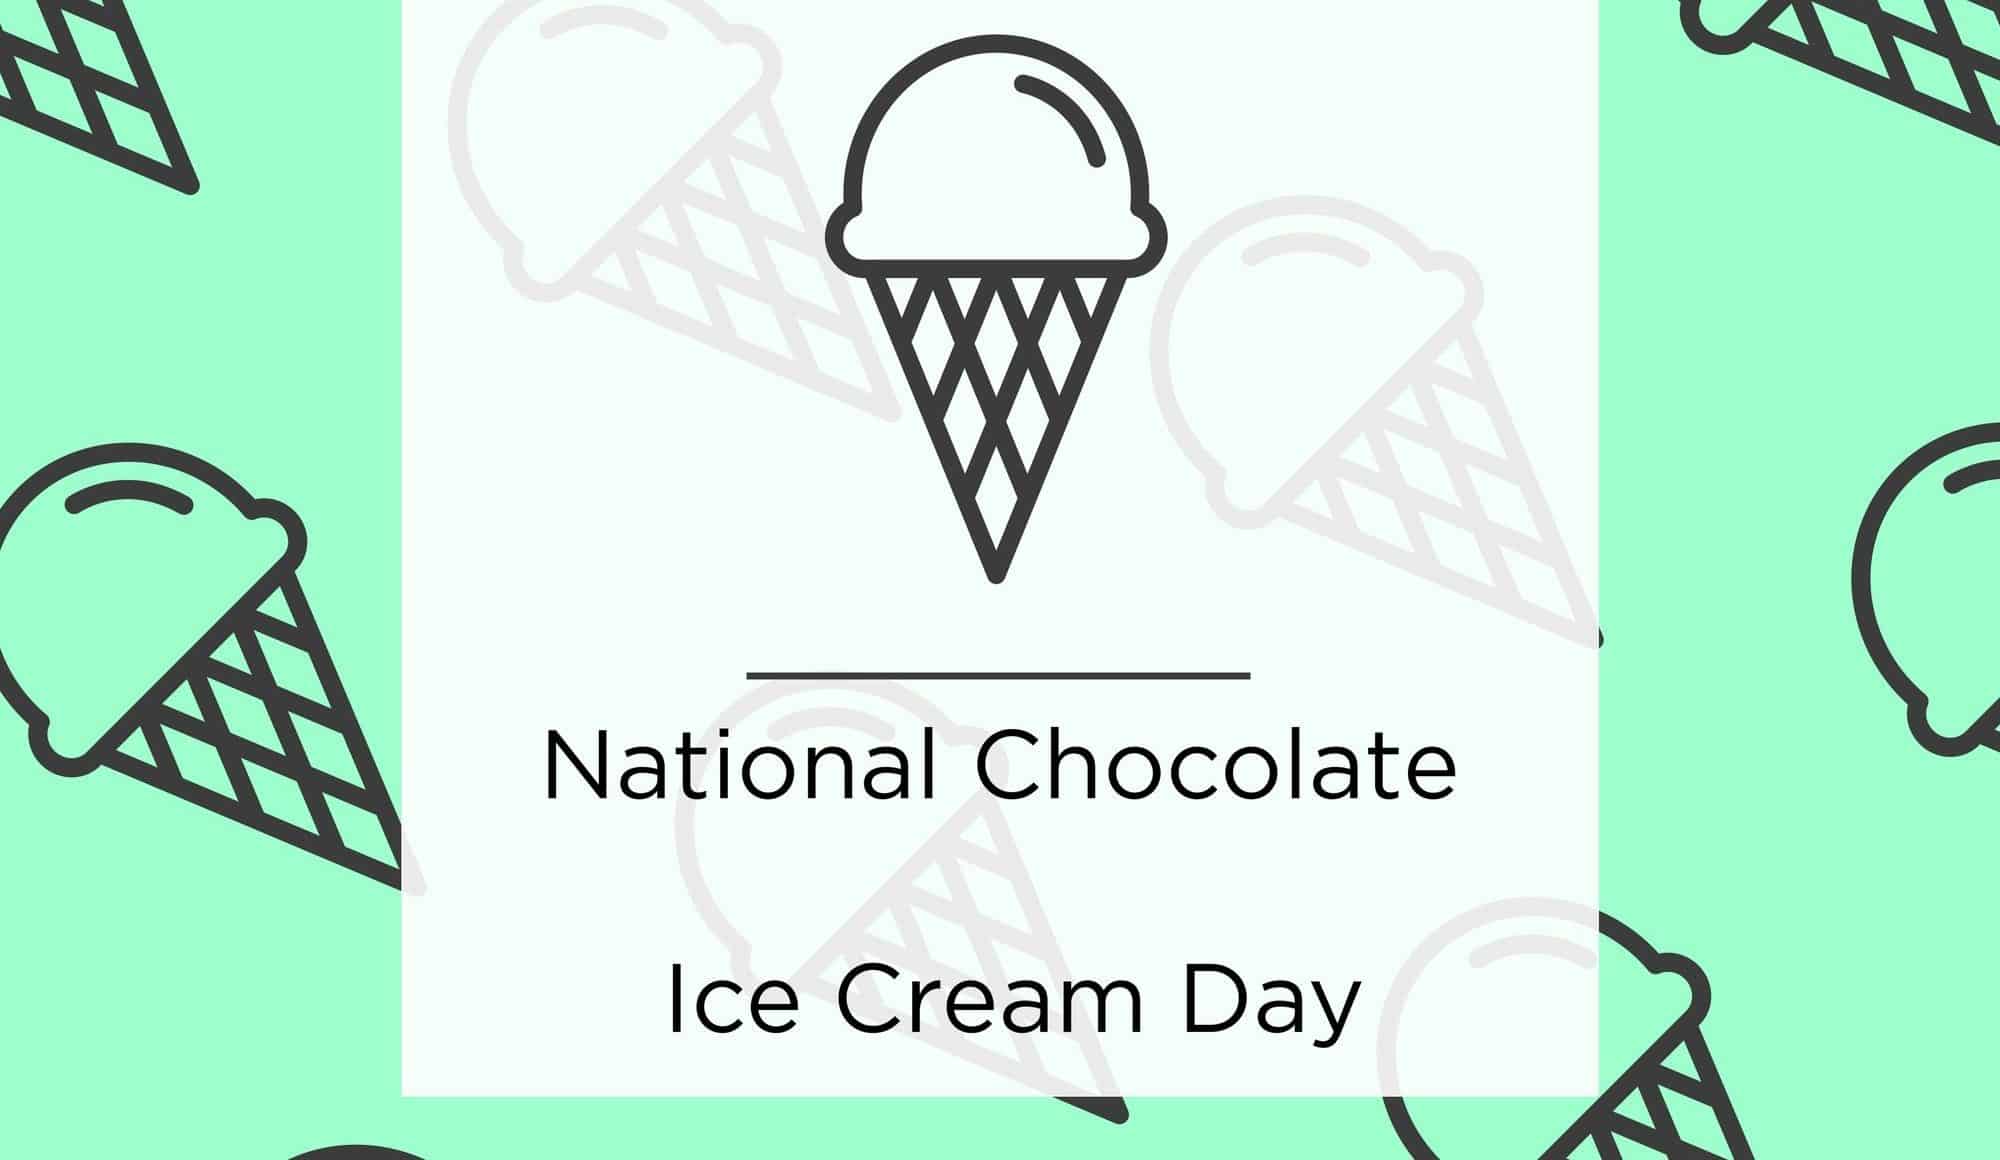 NAtional-chocolate-ice-cream-day-blog-home-page-e1528374852611